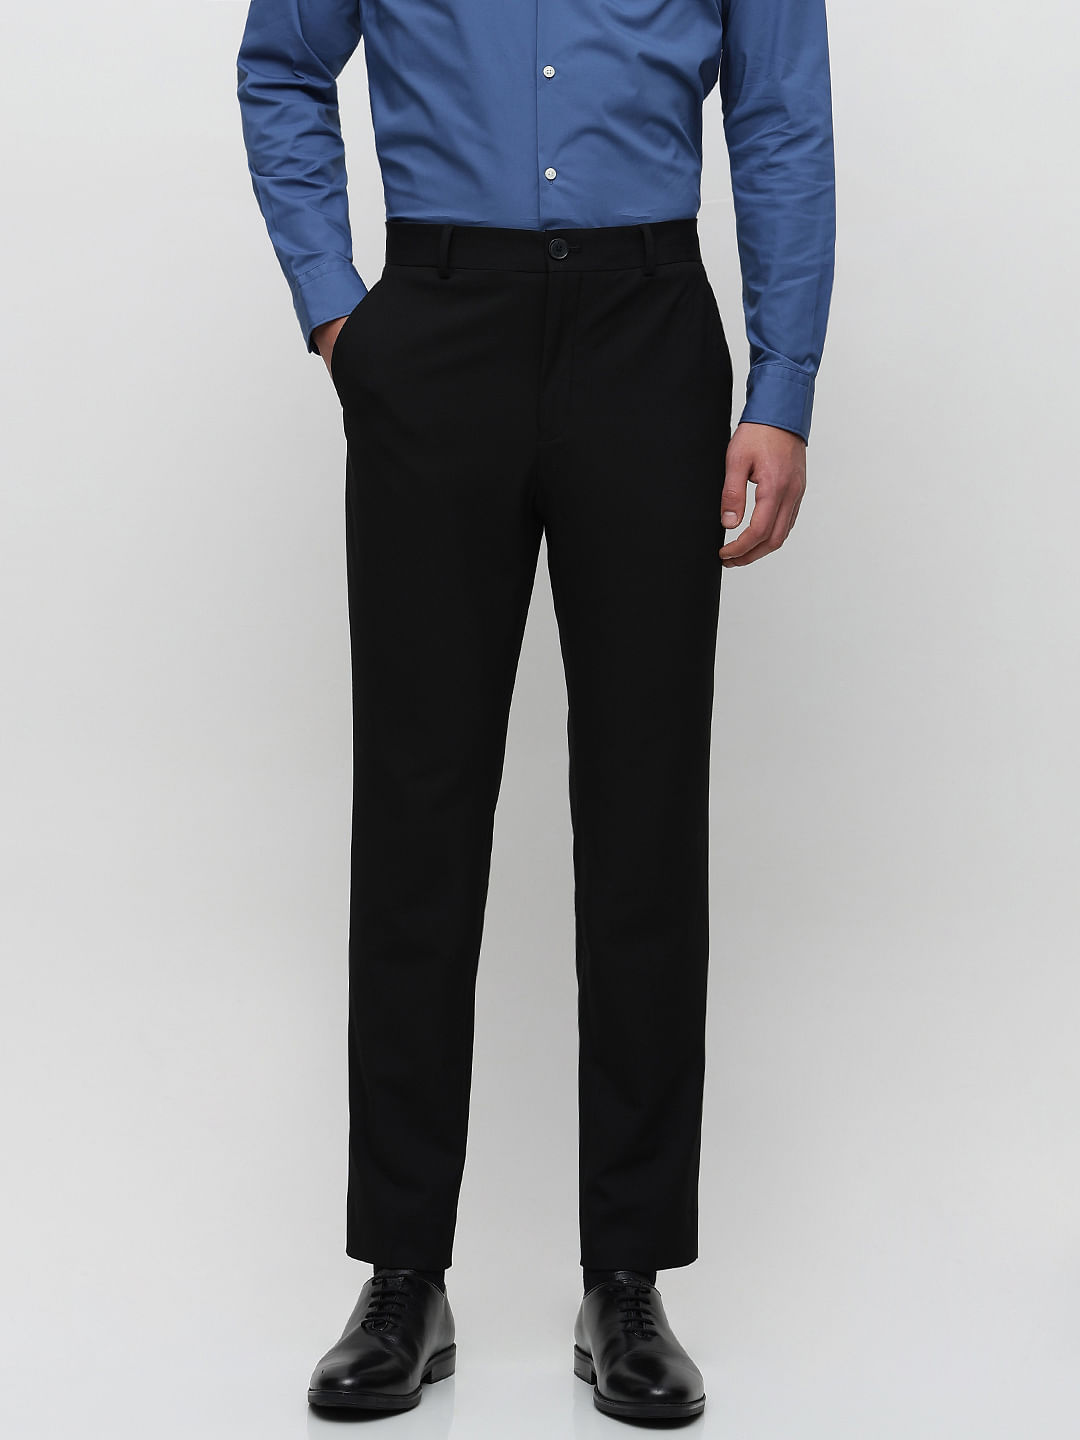 Neo Trousers - Buy Neo Trousers online in India